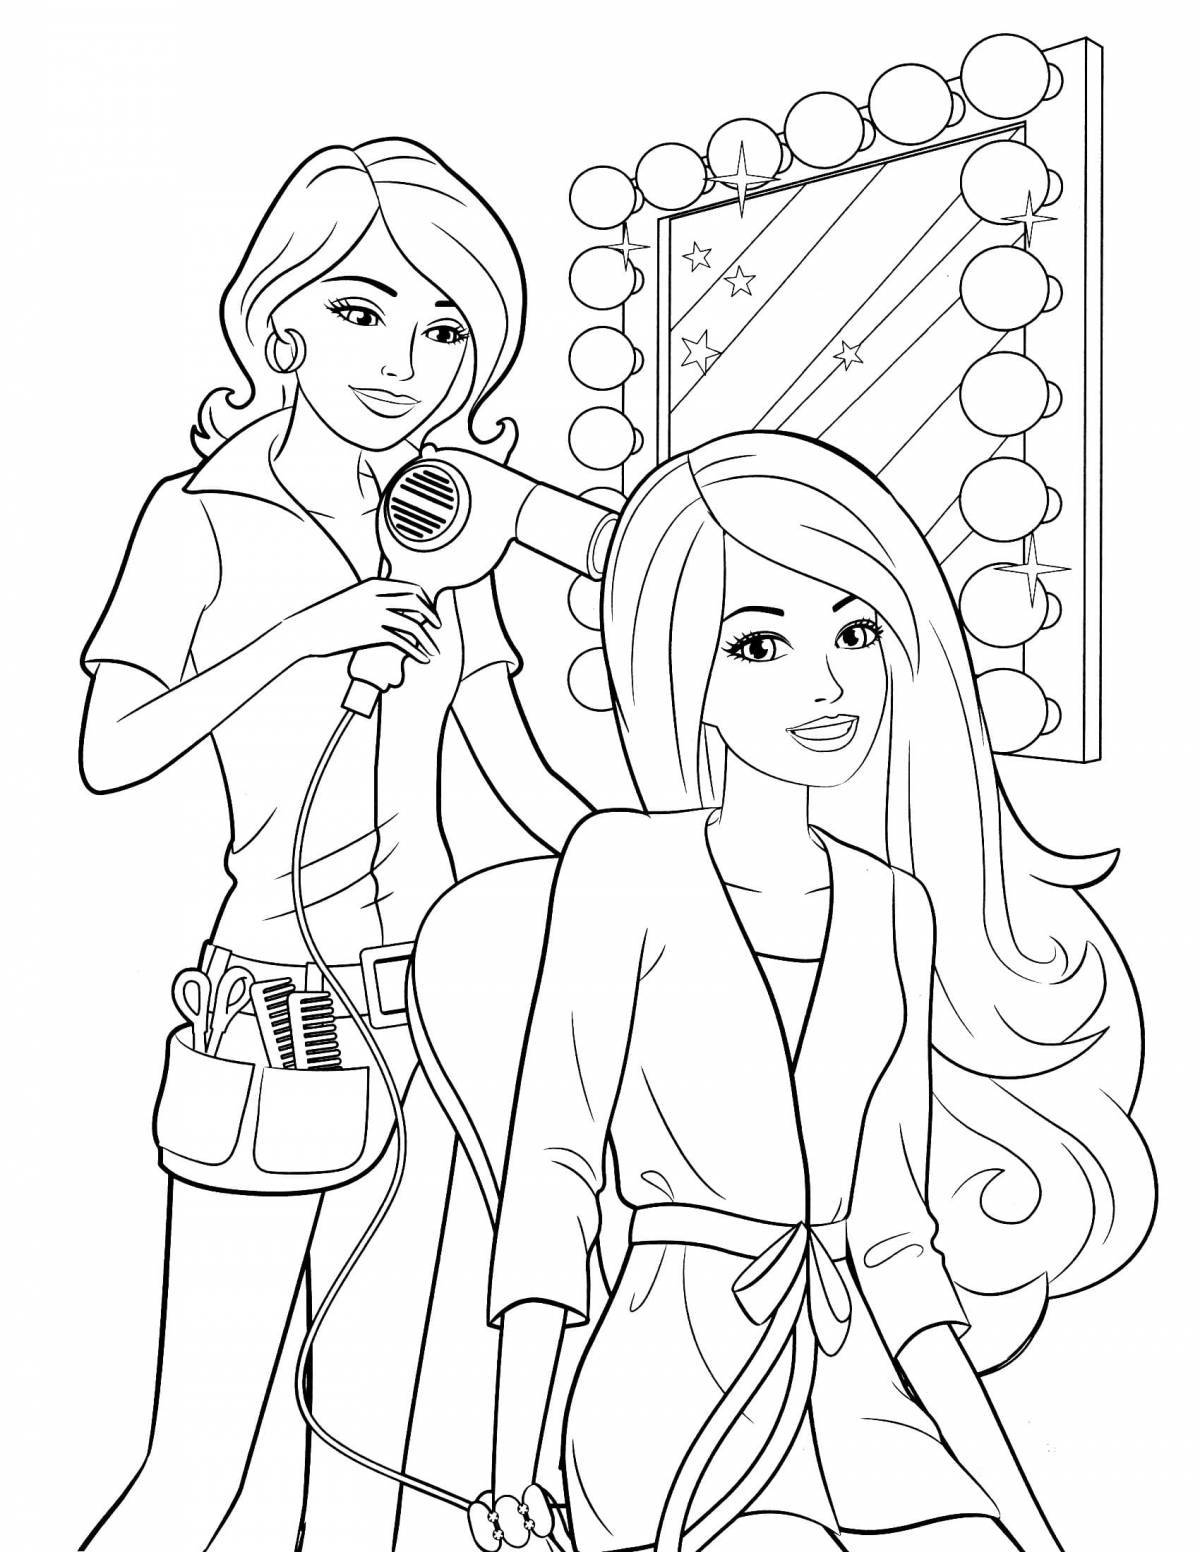 Barbie coloring book for kids